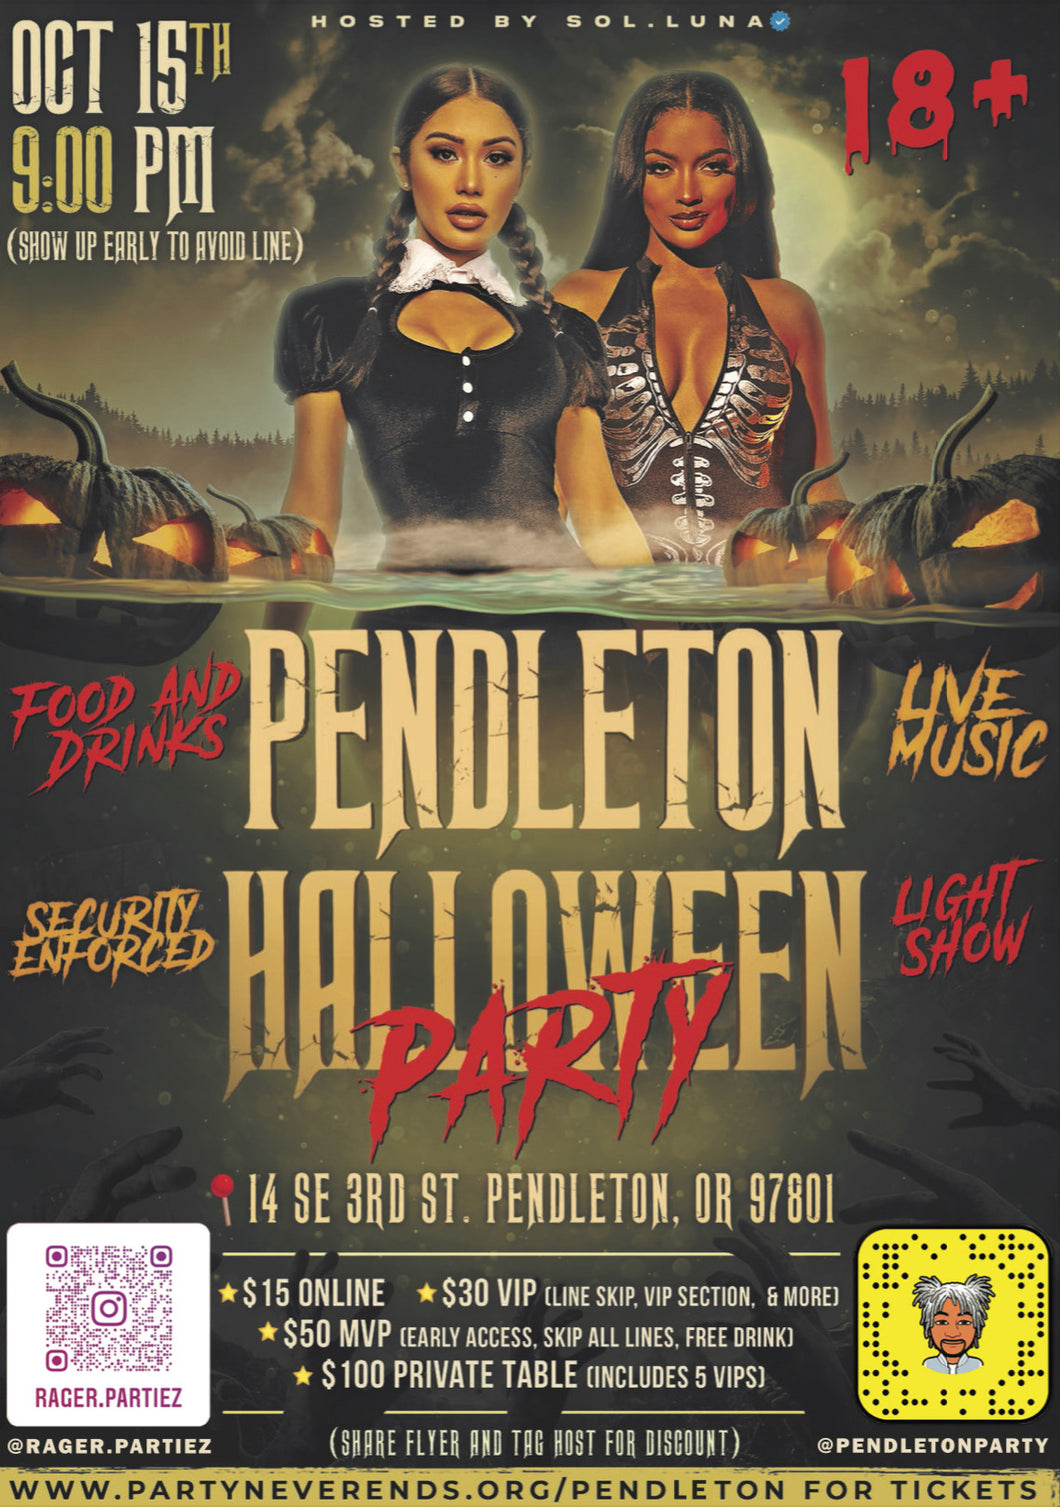 Pendleton Halloween Party General Admission